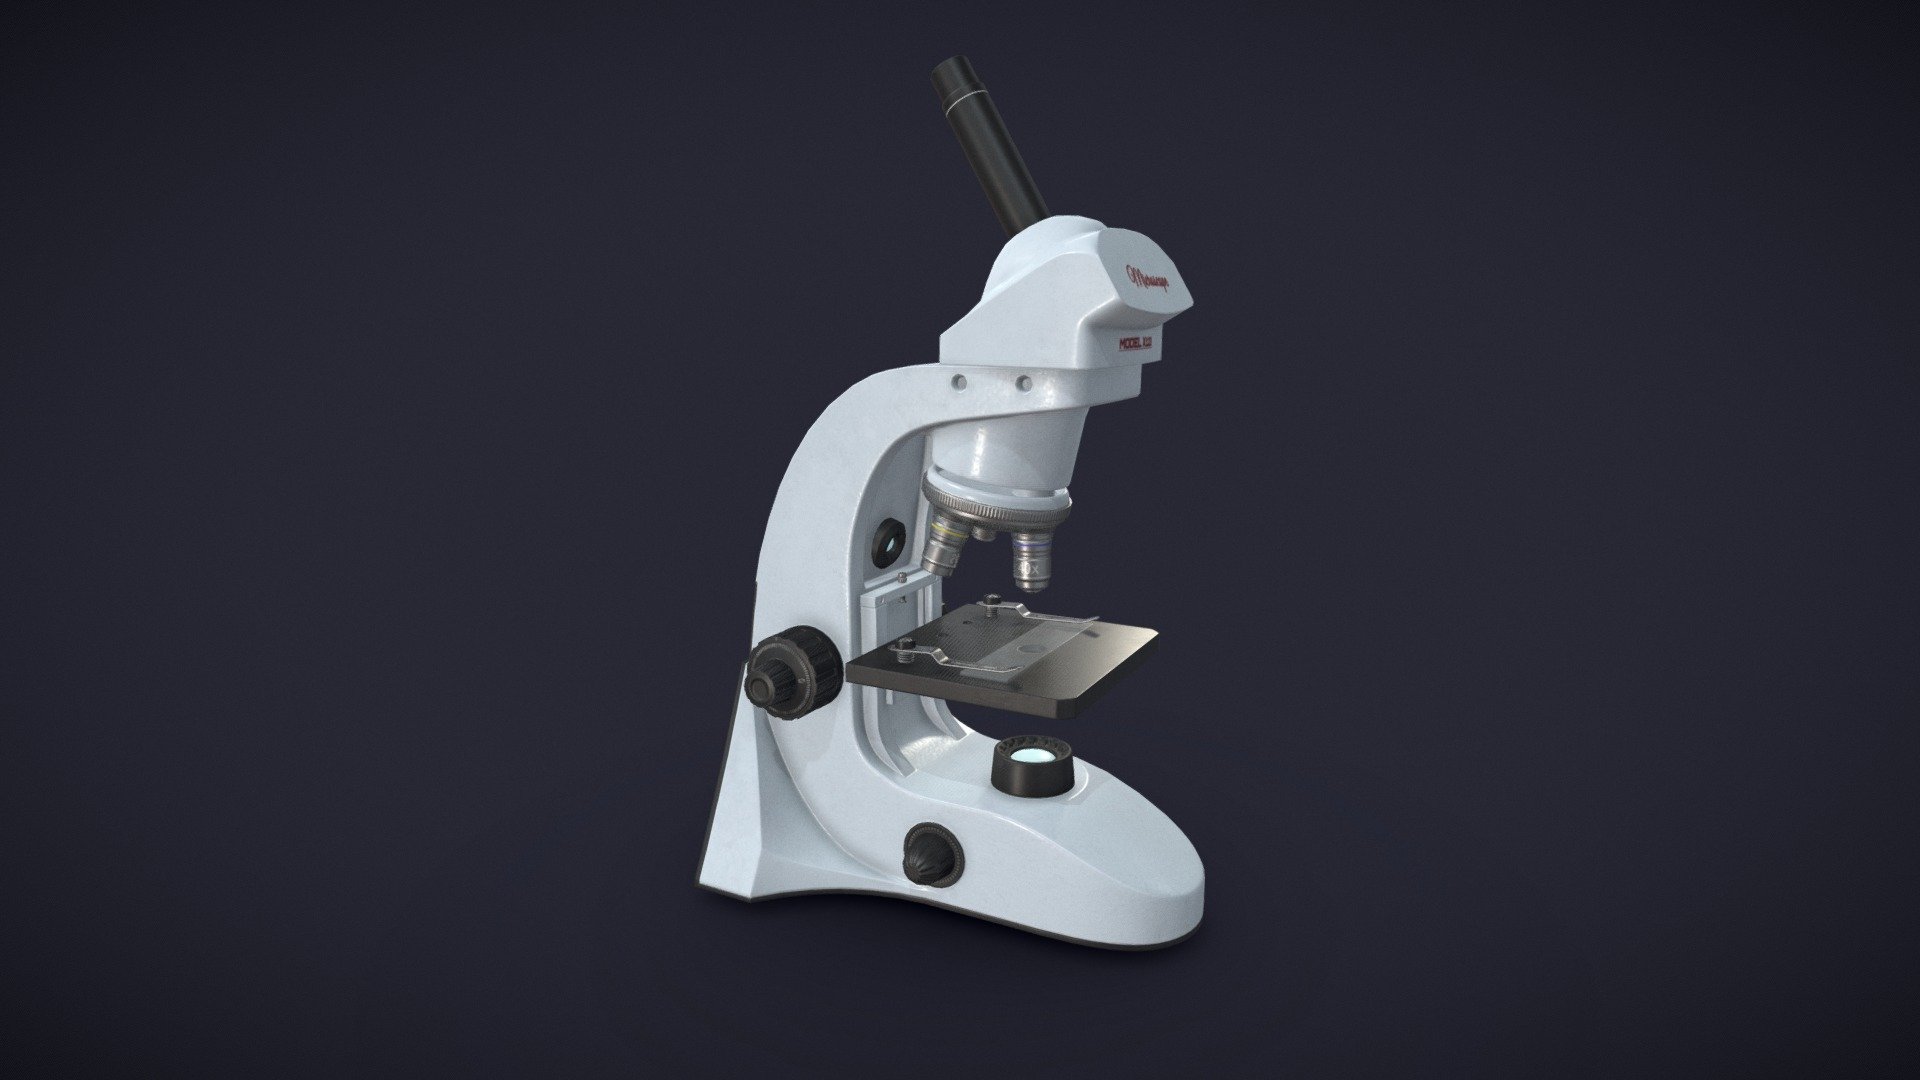 Microscope. Tried to optimize for gamedev.
Soft used:
Blender,
Marmoset Toolbag,
Substance Painter,
Adobe Photoshop 3d model